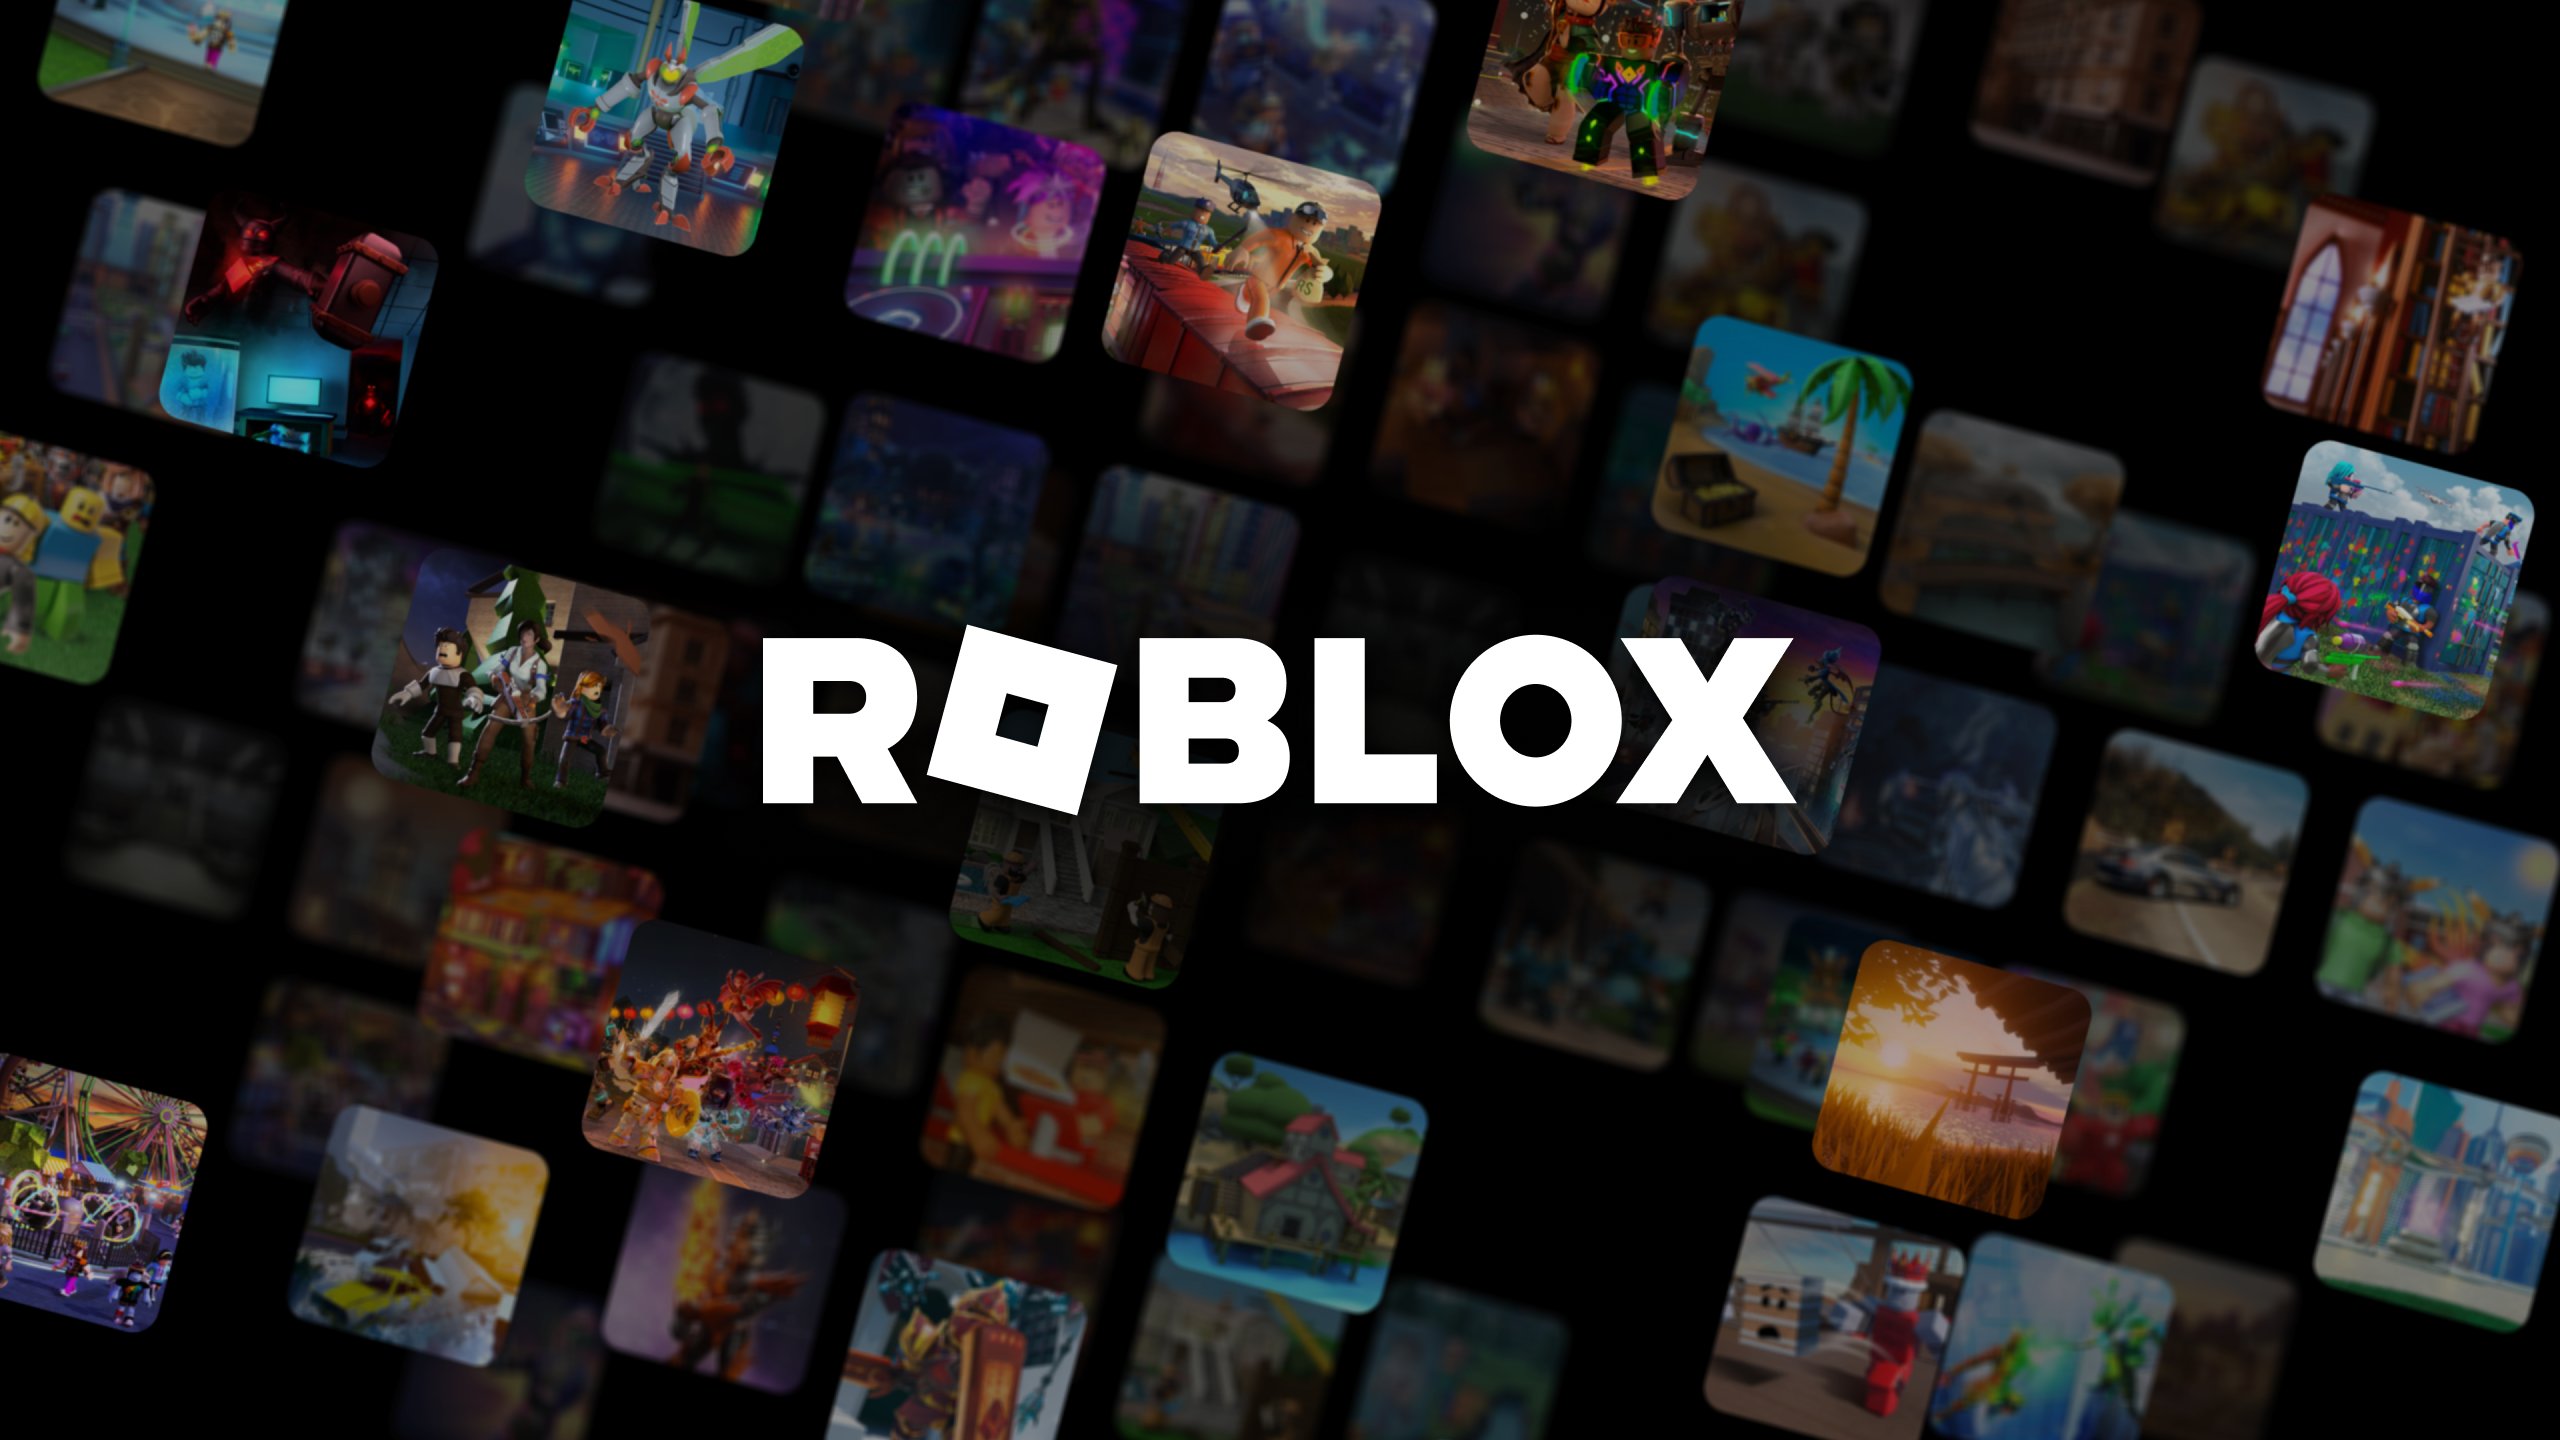 Speechly is joining Roblox